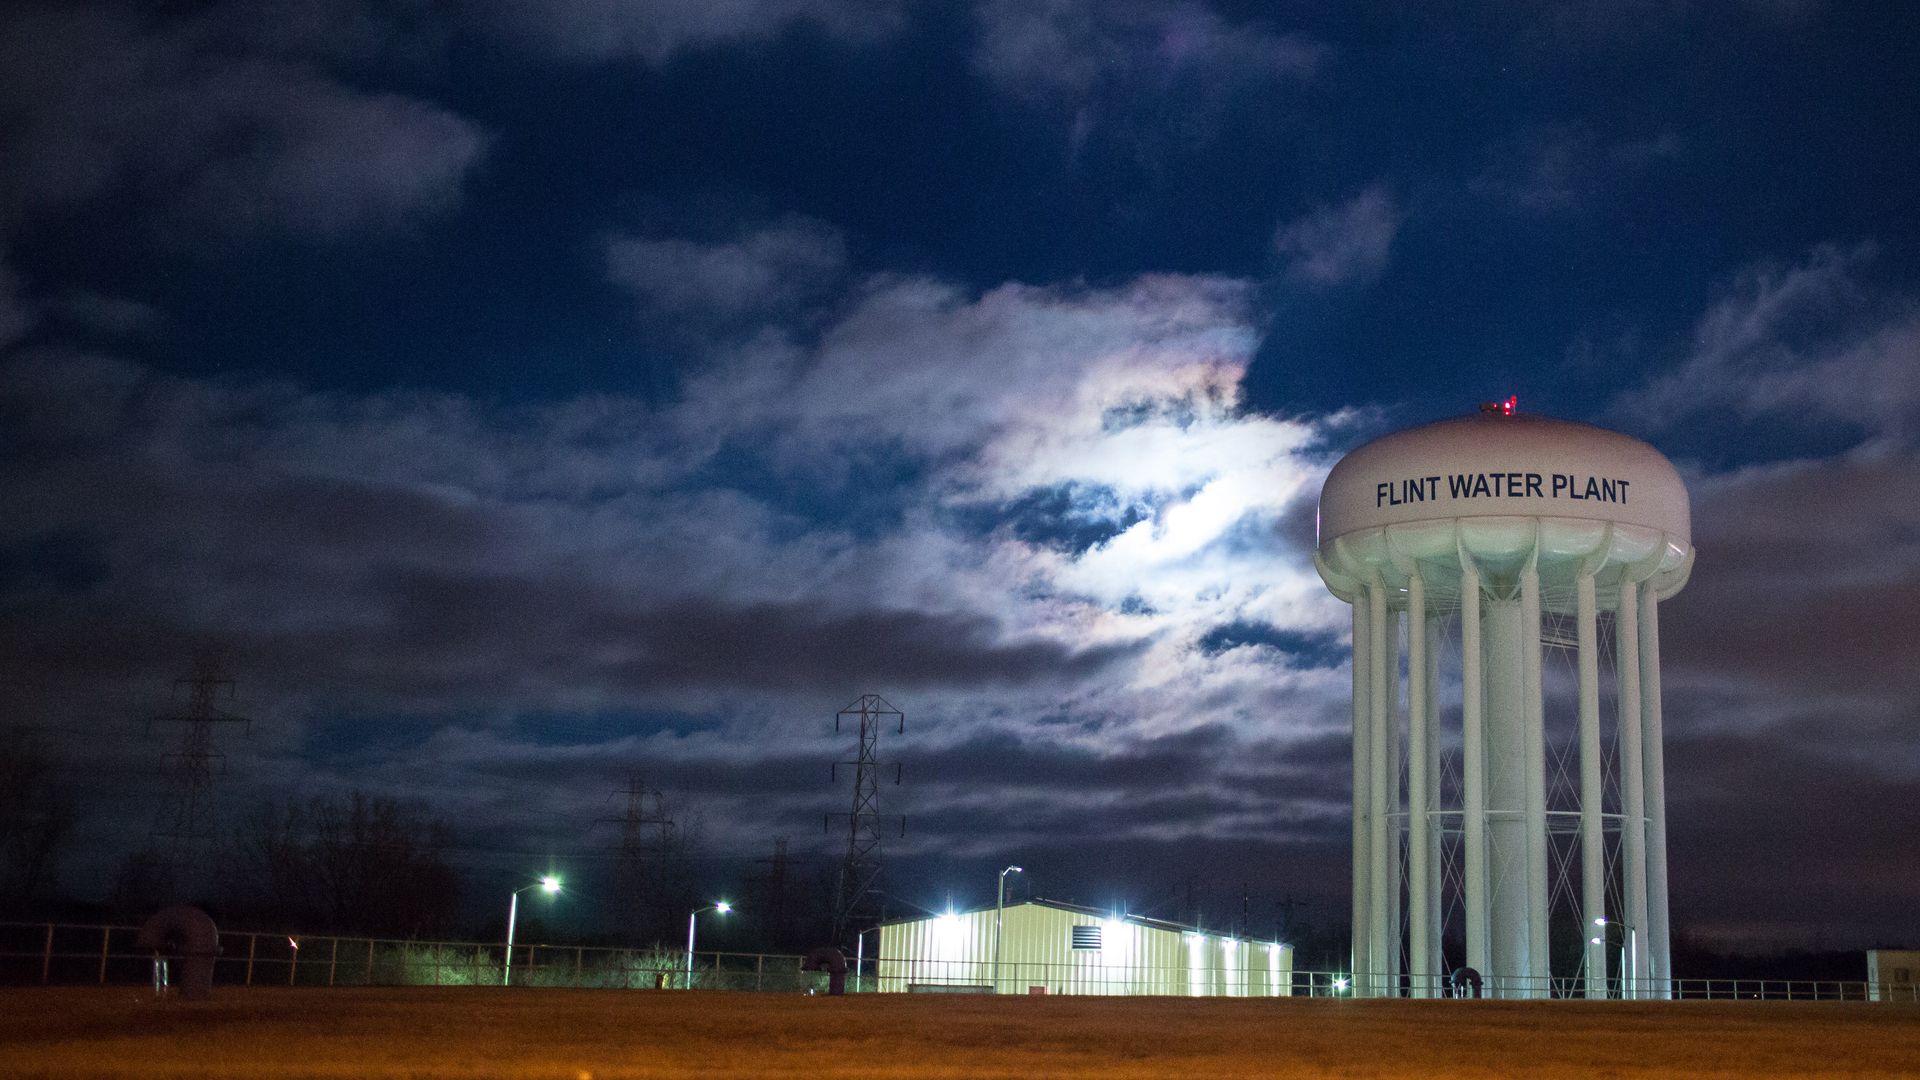 The City of Flint Water Plant is illuminated by moonlight on January 23, 2016 in Flint, Michigan.